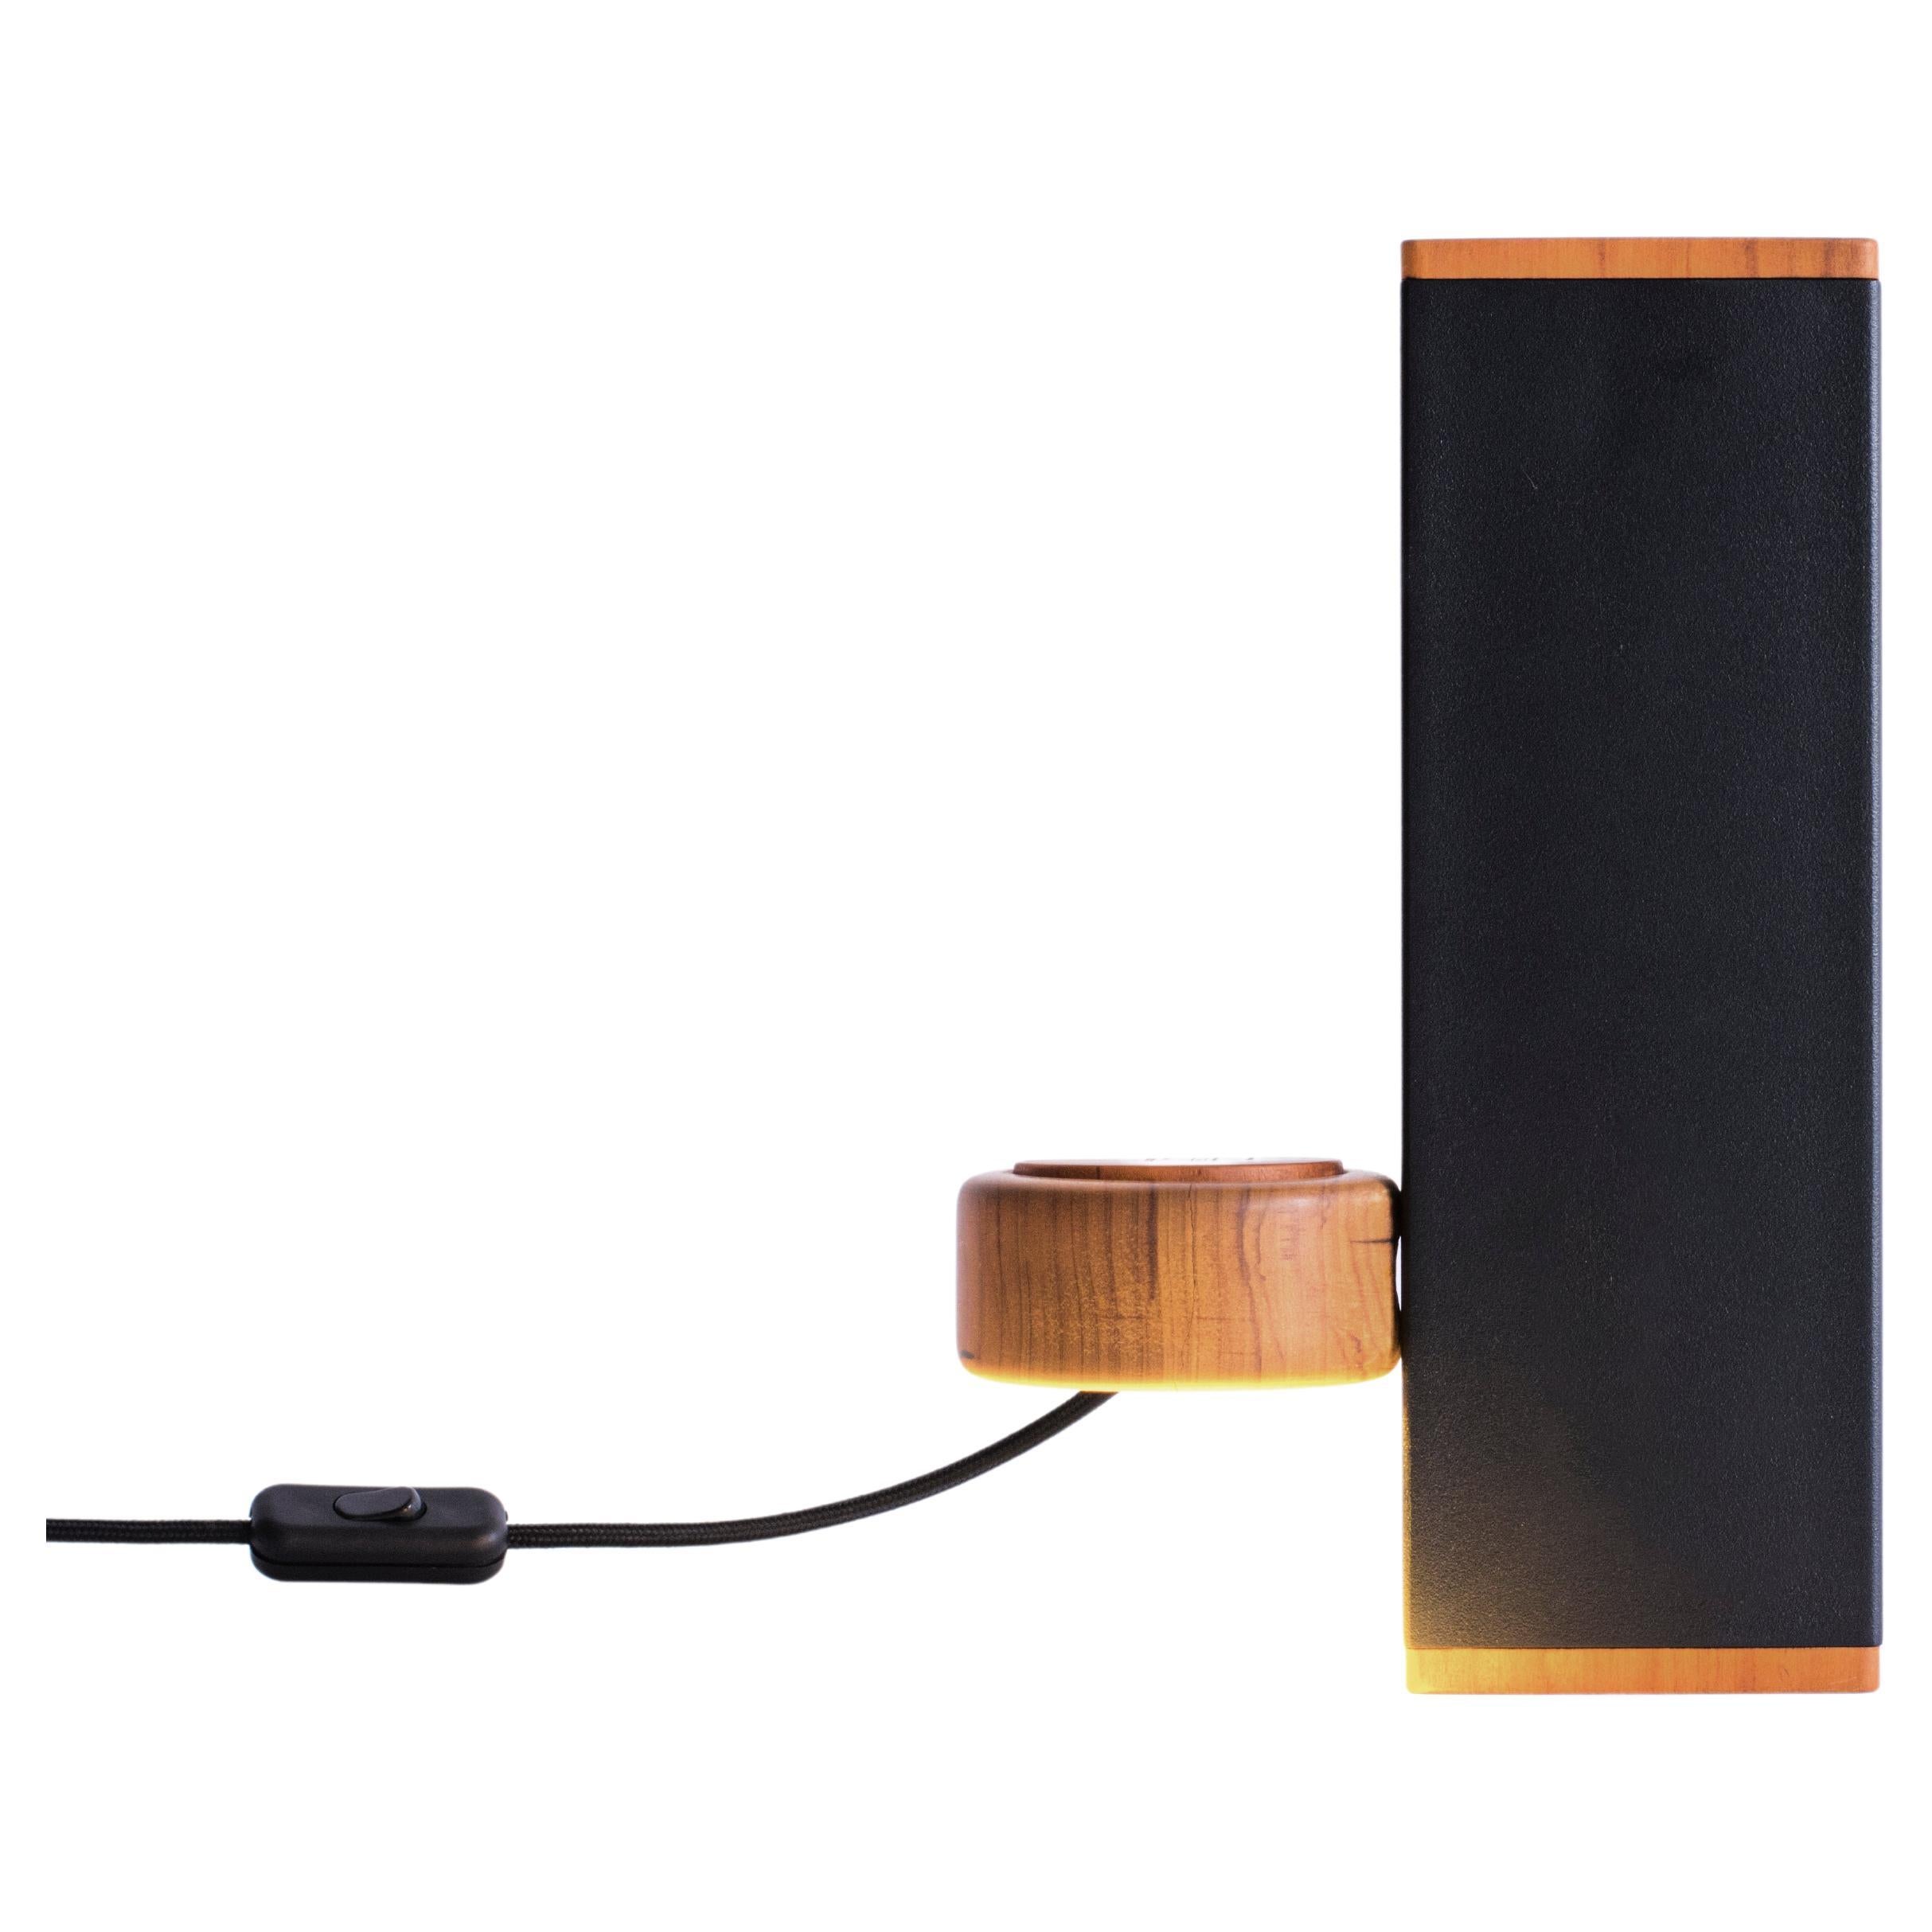 Minimalist Brazilian Handcrafted Table Lamp "Wé" by Dimitrih Correa For Sale